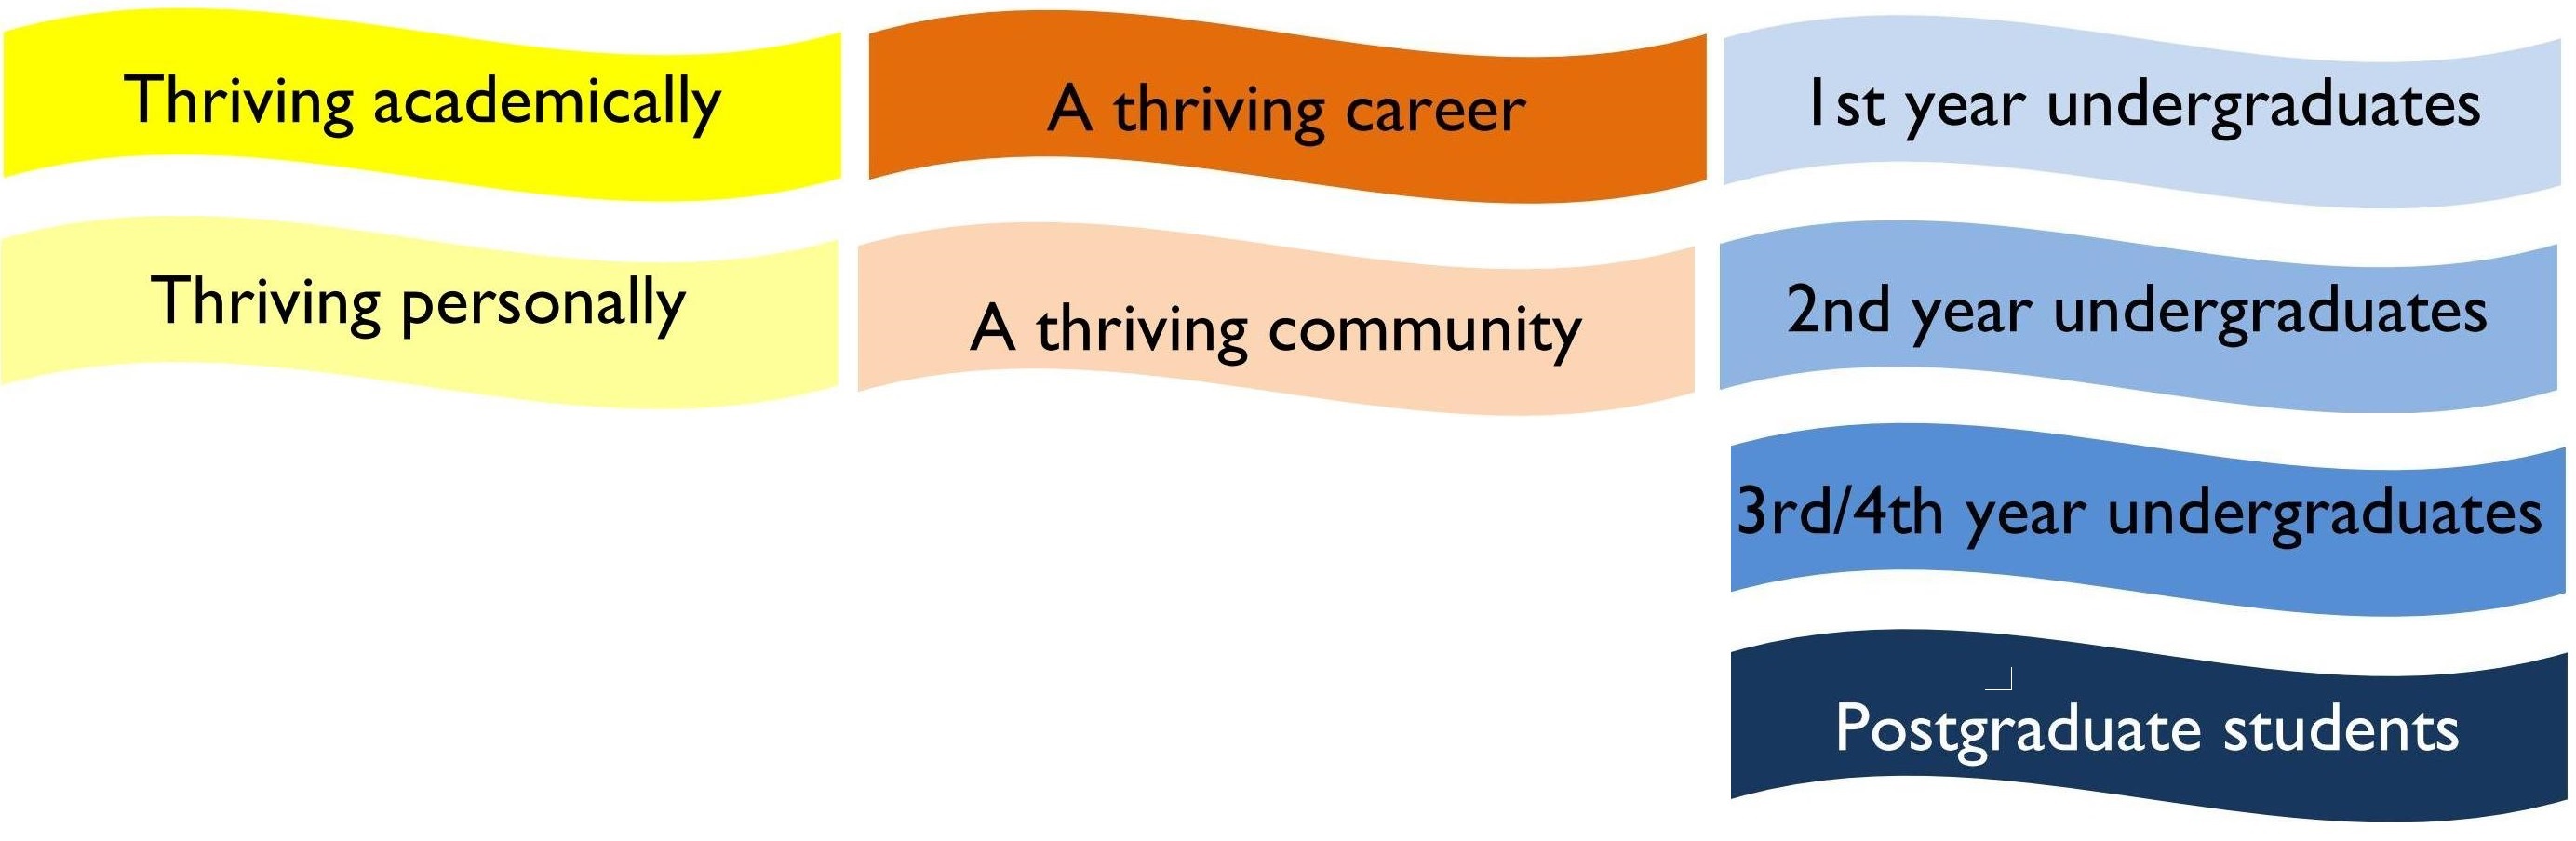 List of Thrive strands: Thriving academically, Thrive personally, a Thriving career, a Thriving community